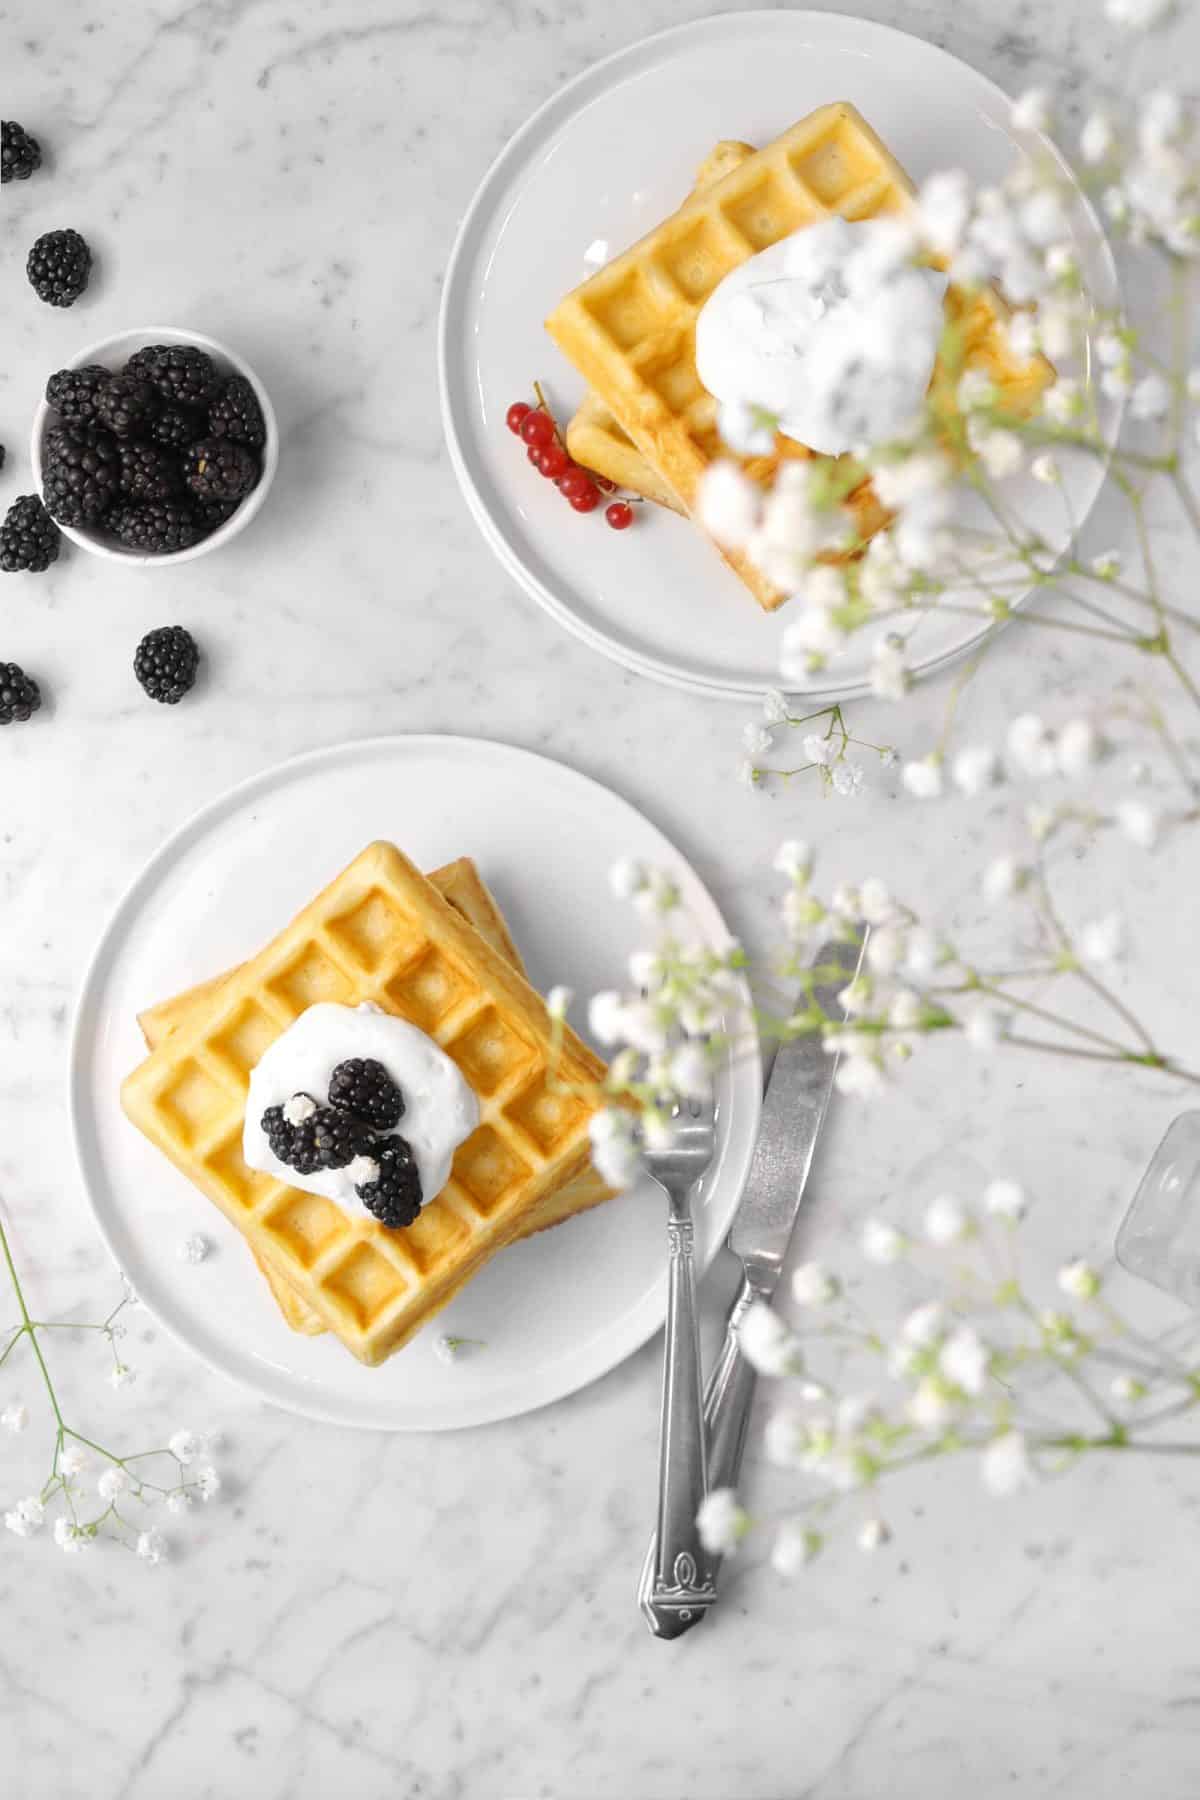 two plates of sourdough waffles on a marble counter with white flowers and blackberries